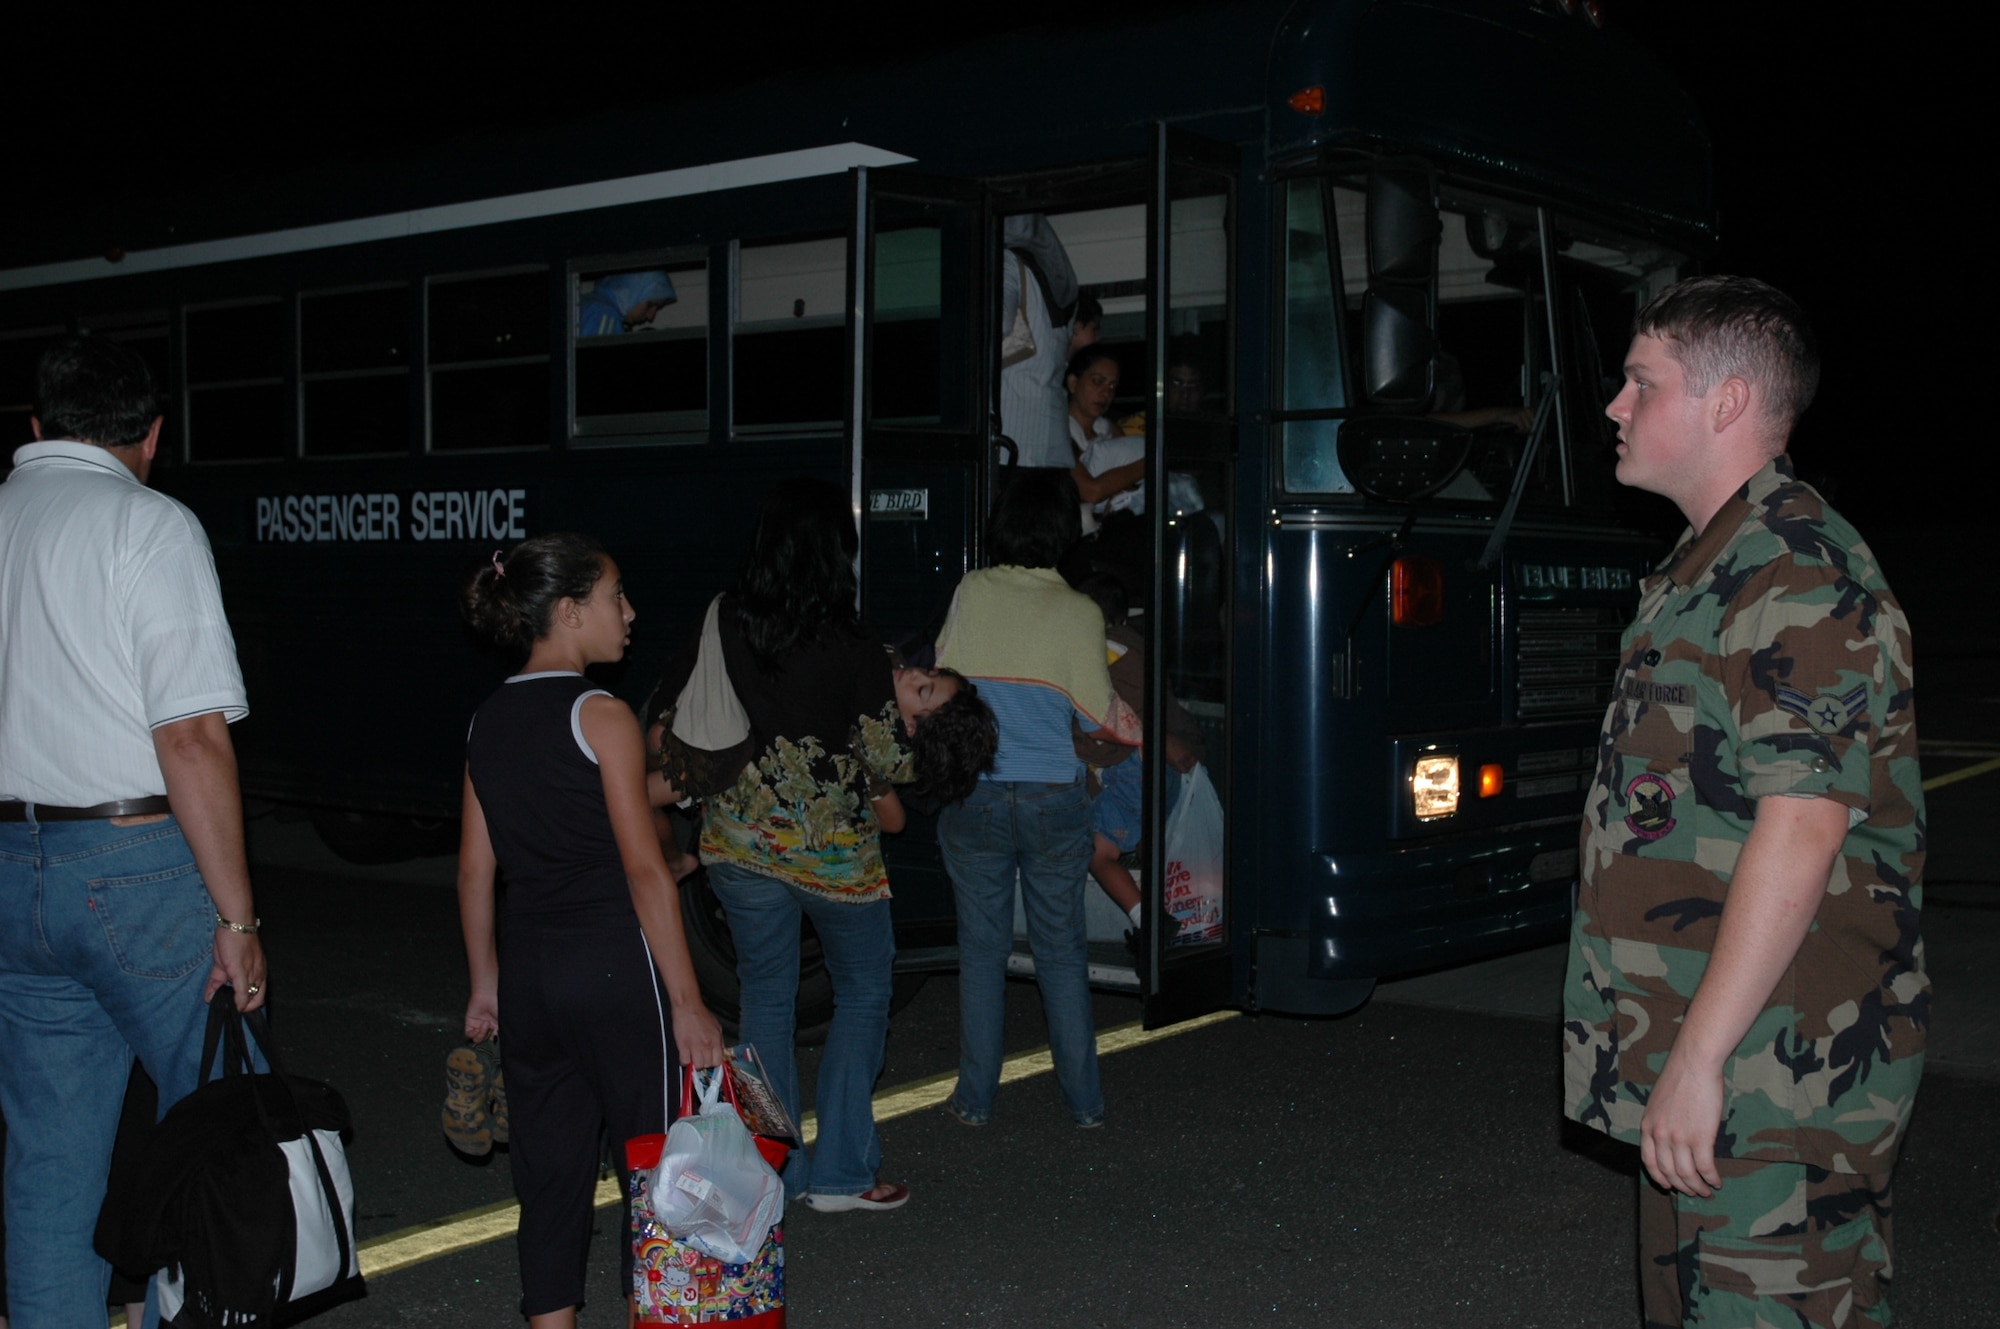 RAMSTEIN AB, Germany -- Airman 1st Class Cody Orick, 723rd Air Mobility Squadron Passenger Services, directs American citizens displaced from Lebanon onto a bus to transport them to a C-17 waiting to return them to the United States July 23.
(Photo by SMSgt Stefan Alford)